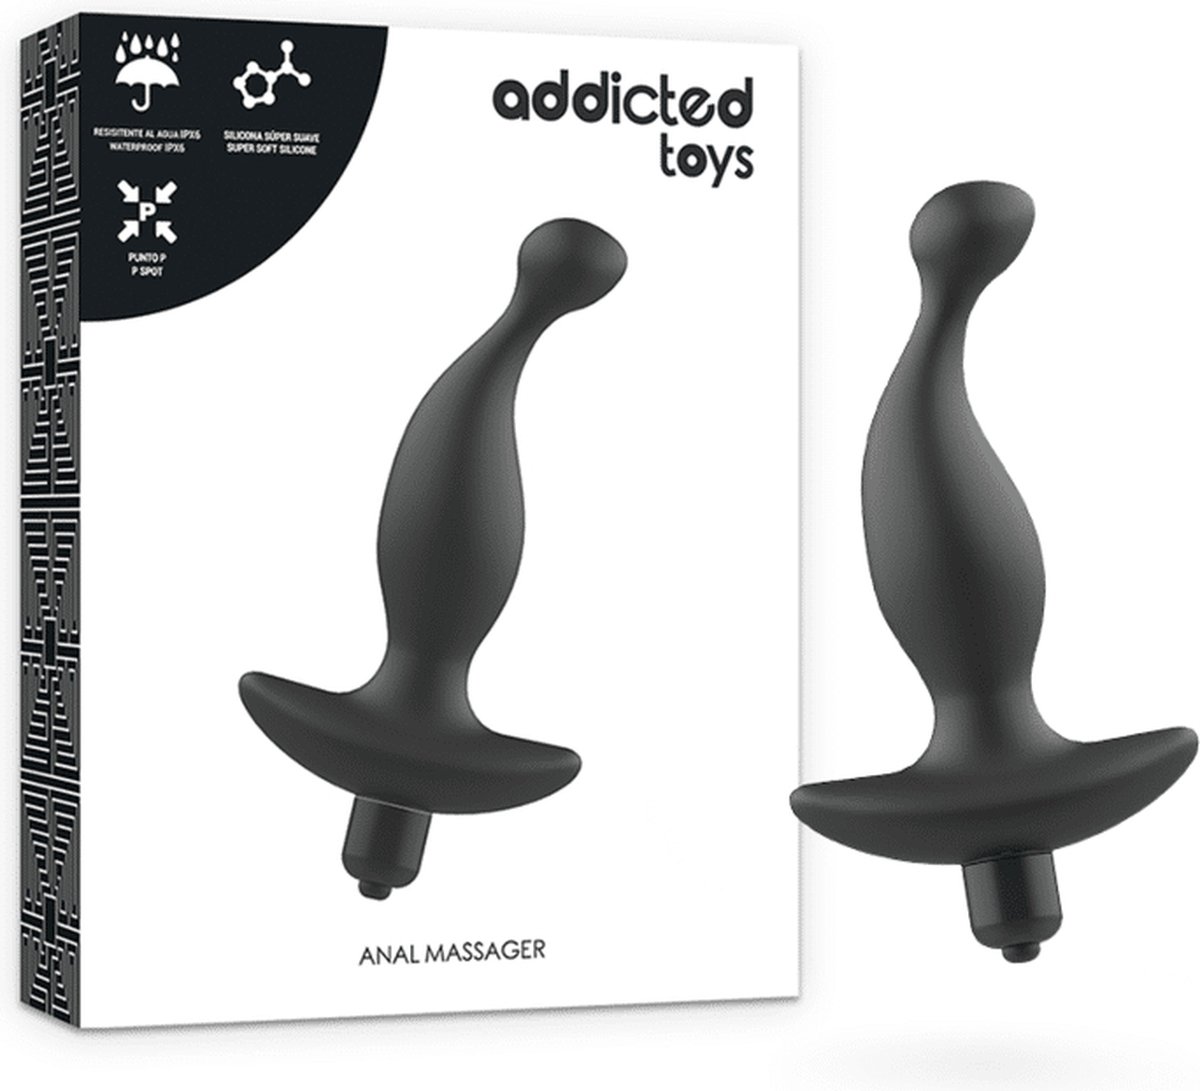 ADDICTED TOYS | Addicted Toys Anal Massager With Vibration Black | Sex Toy for Couples | Buttplug | Prostate Massager | Sex Toy for Woman